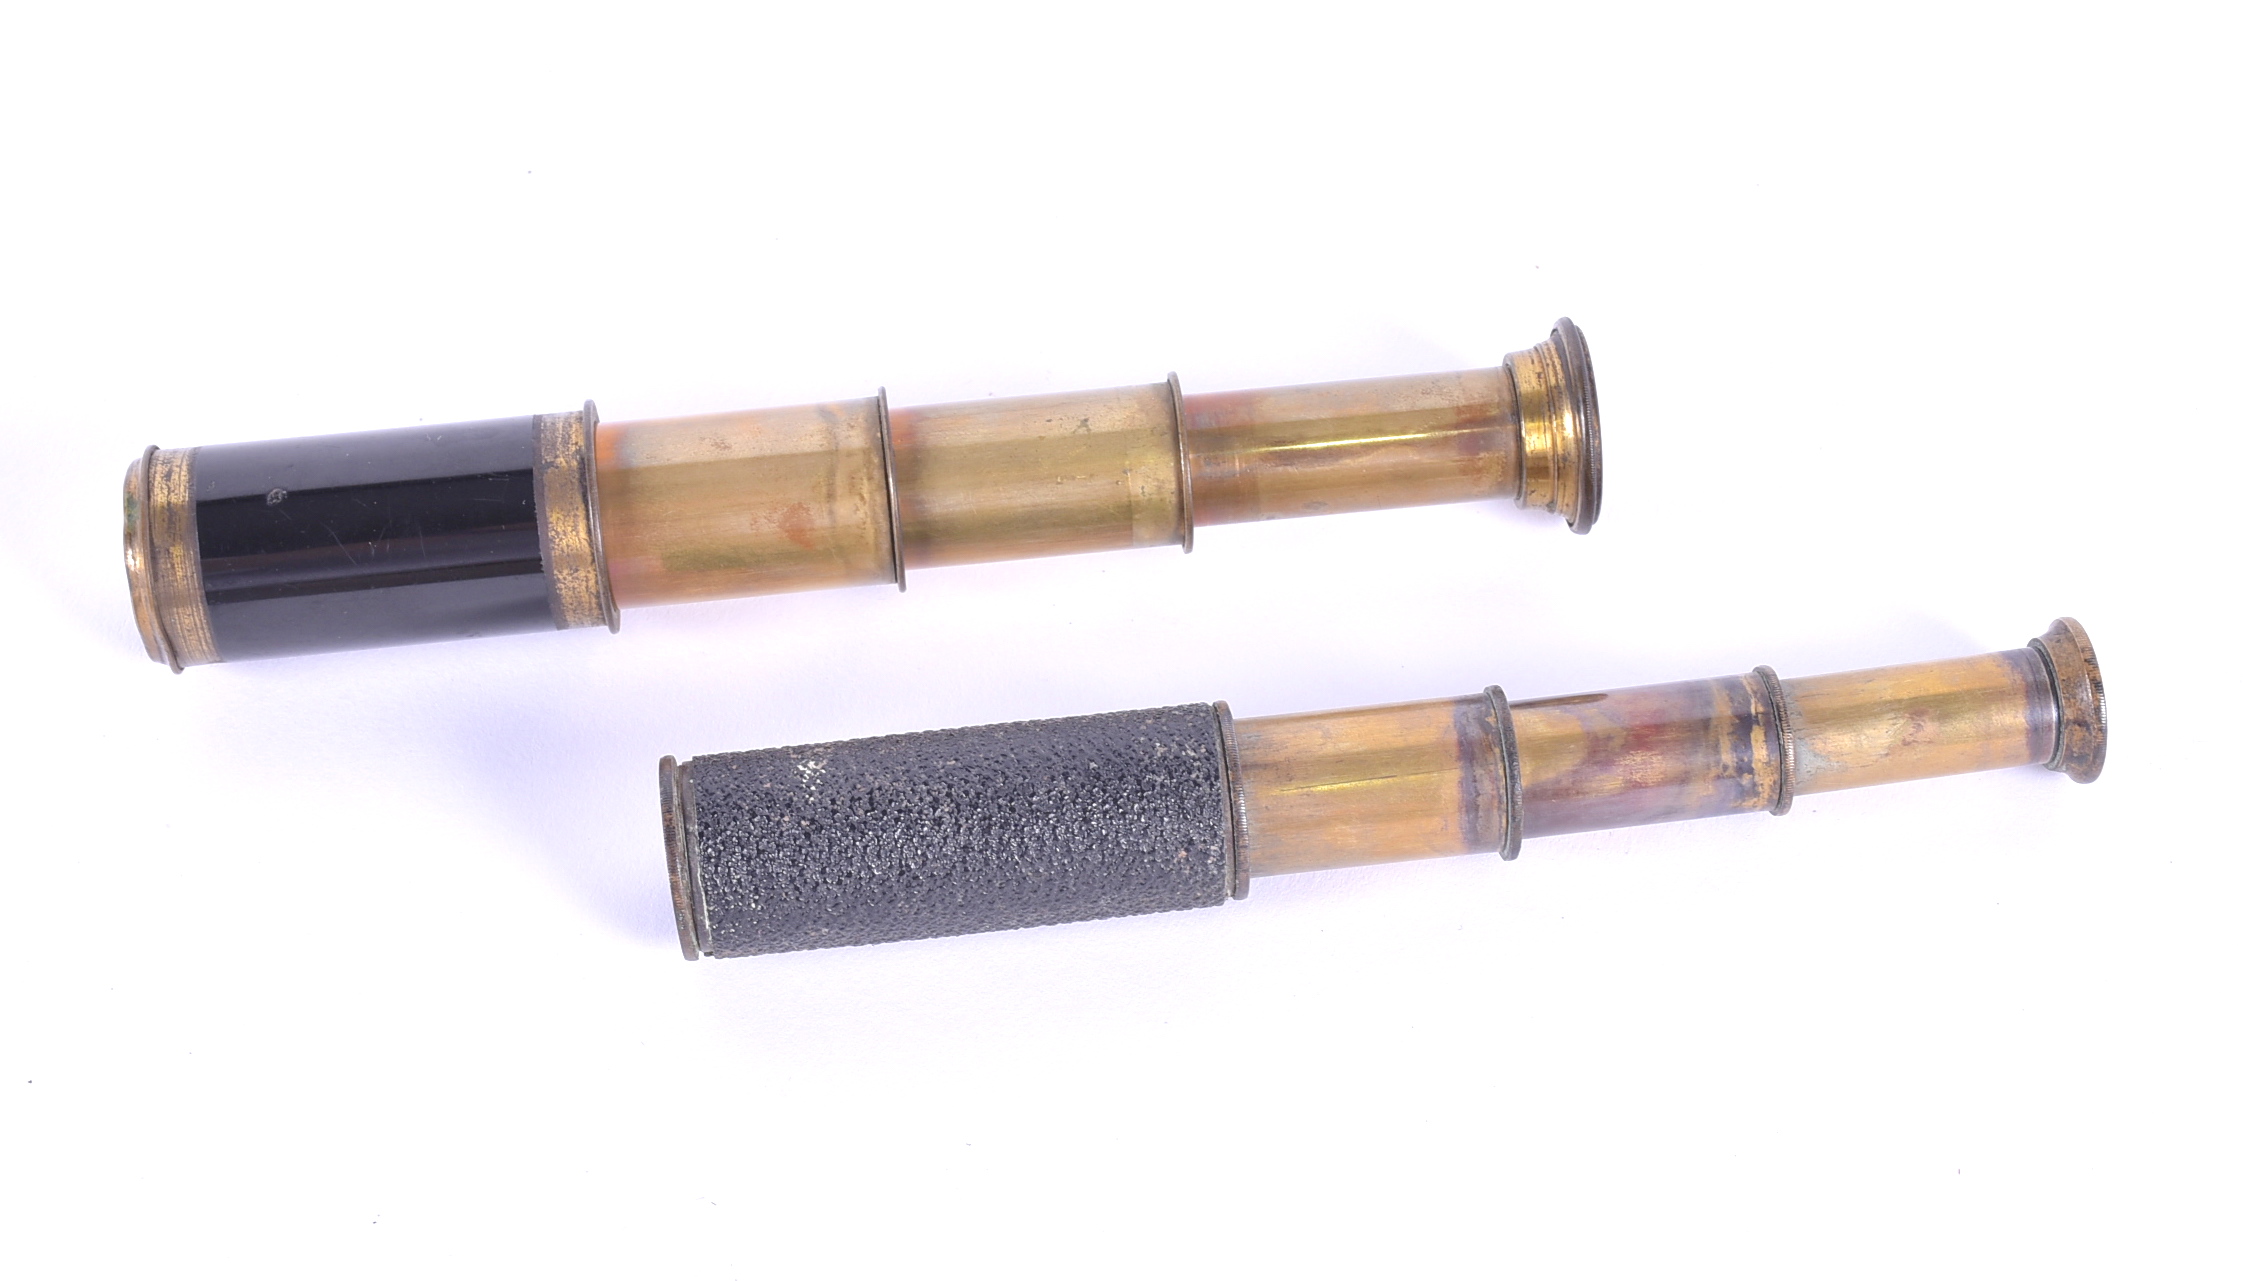 Two miniature brass telescopes each in four segments, lenses intact, one with textured body.